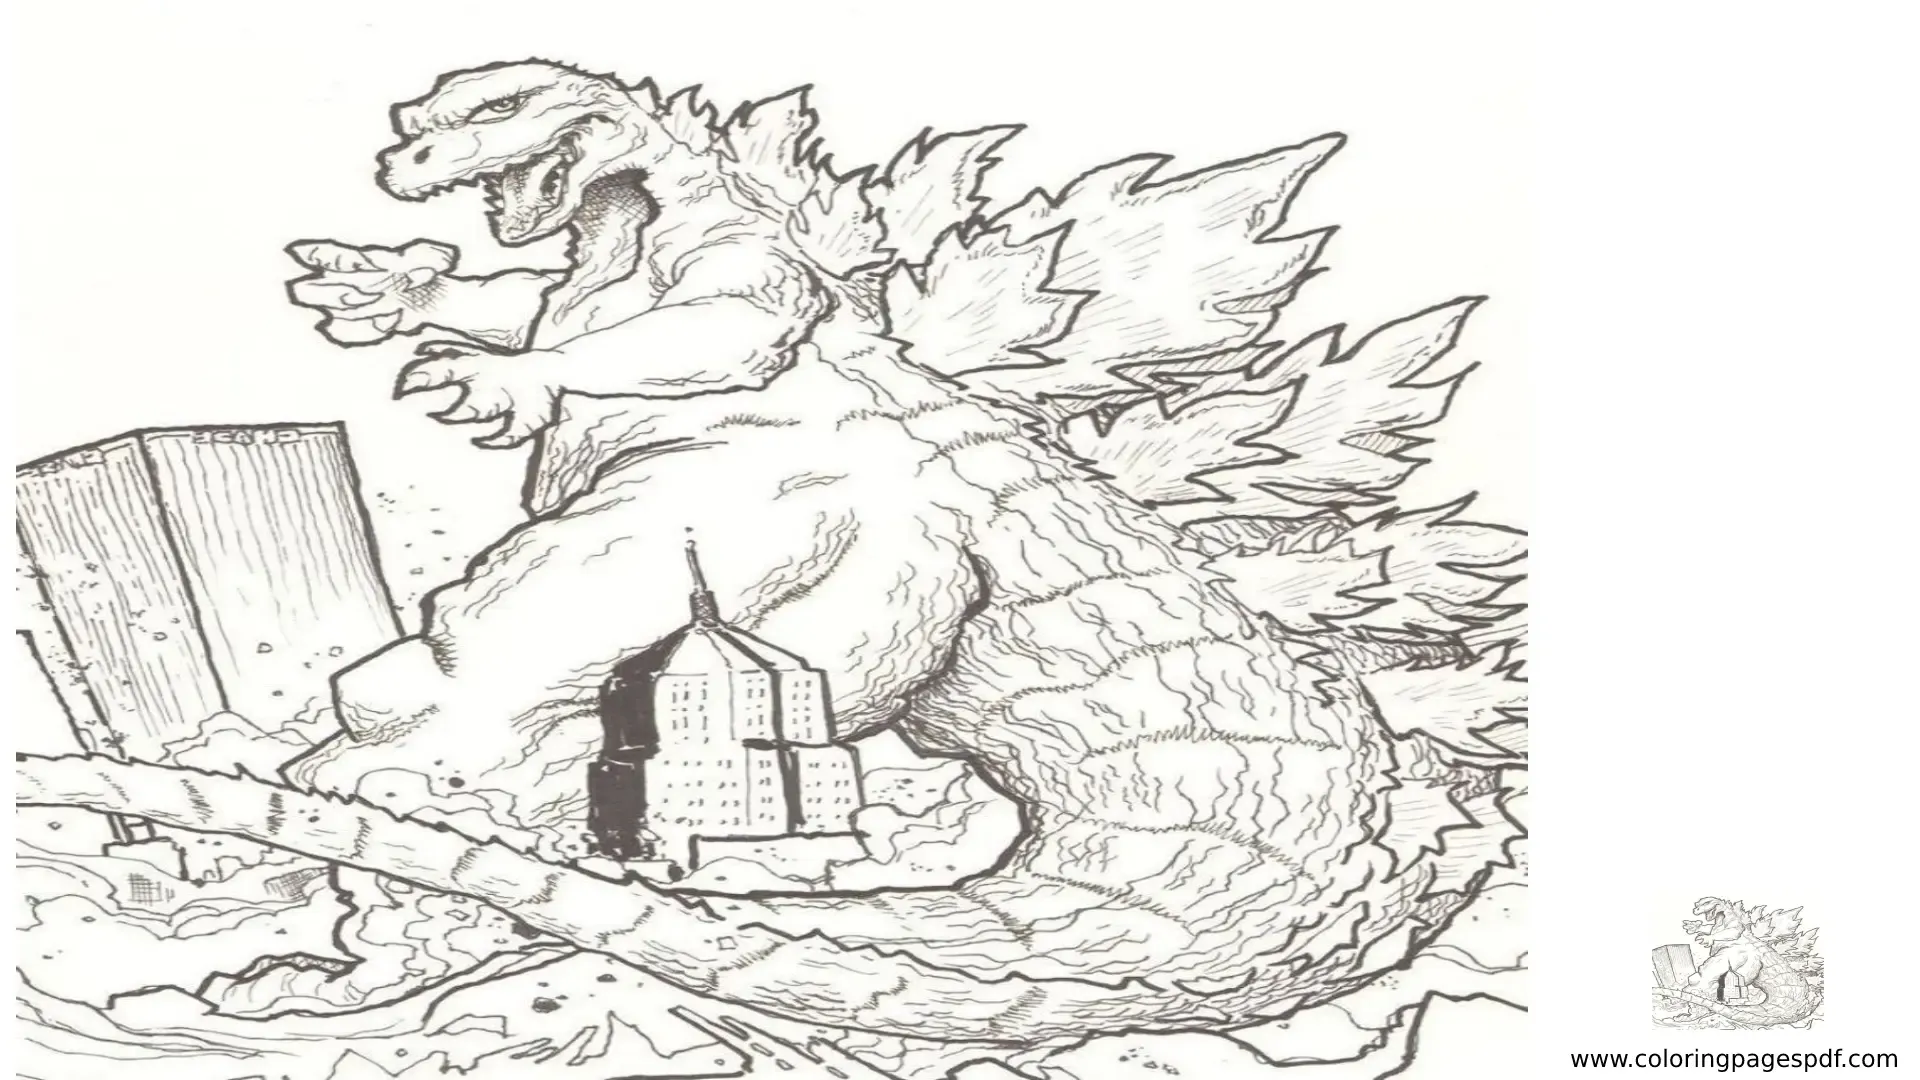 Coloring Pages Of Godzilla Destroying The City